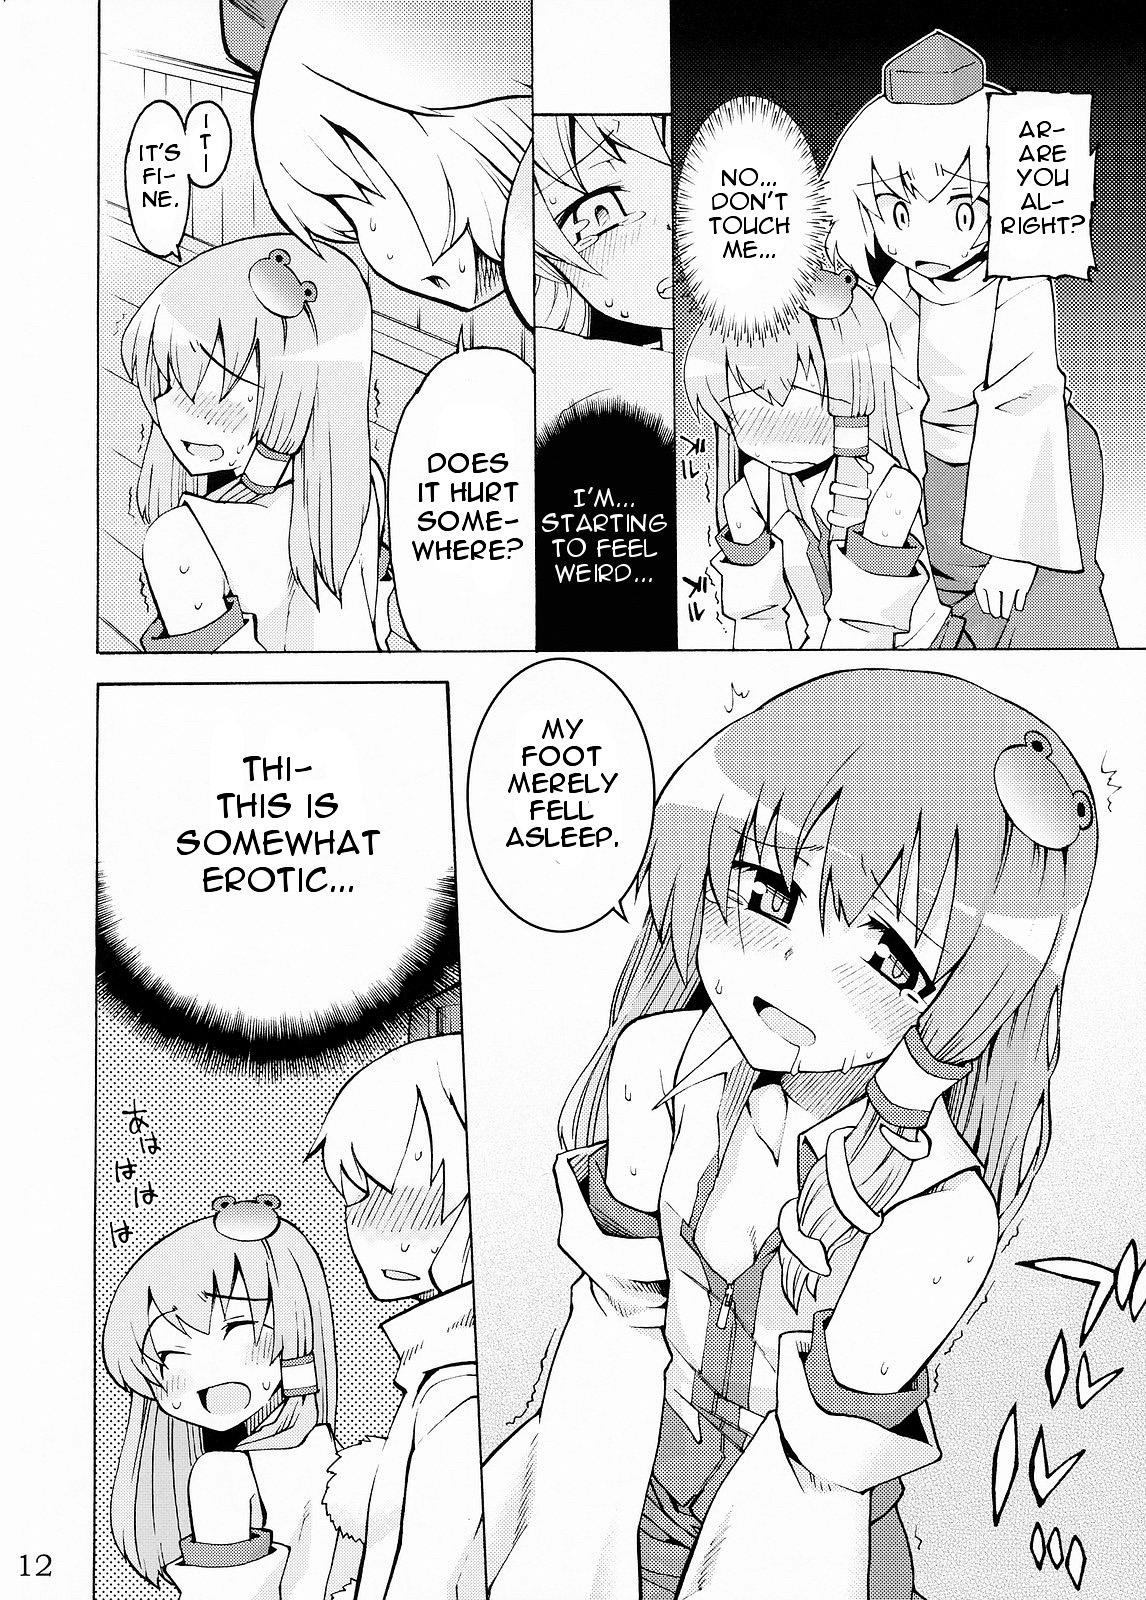 Sesso Kami-sama to Issho! Happy every day! - Touhou project Maid - Page 12